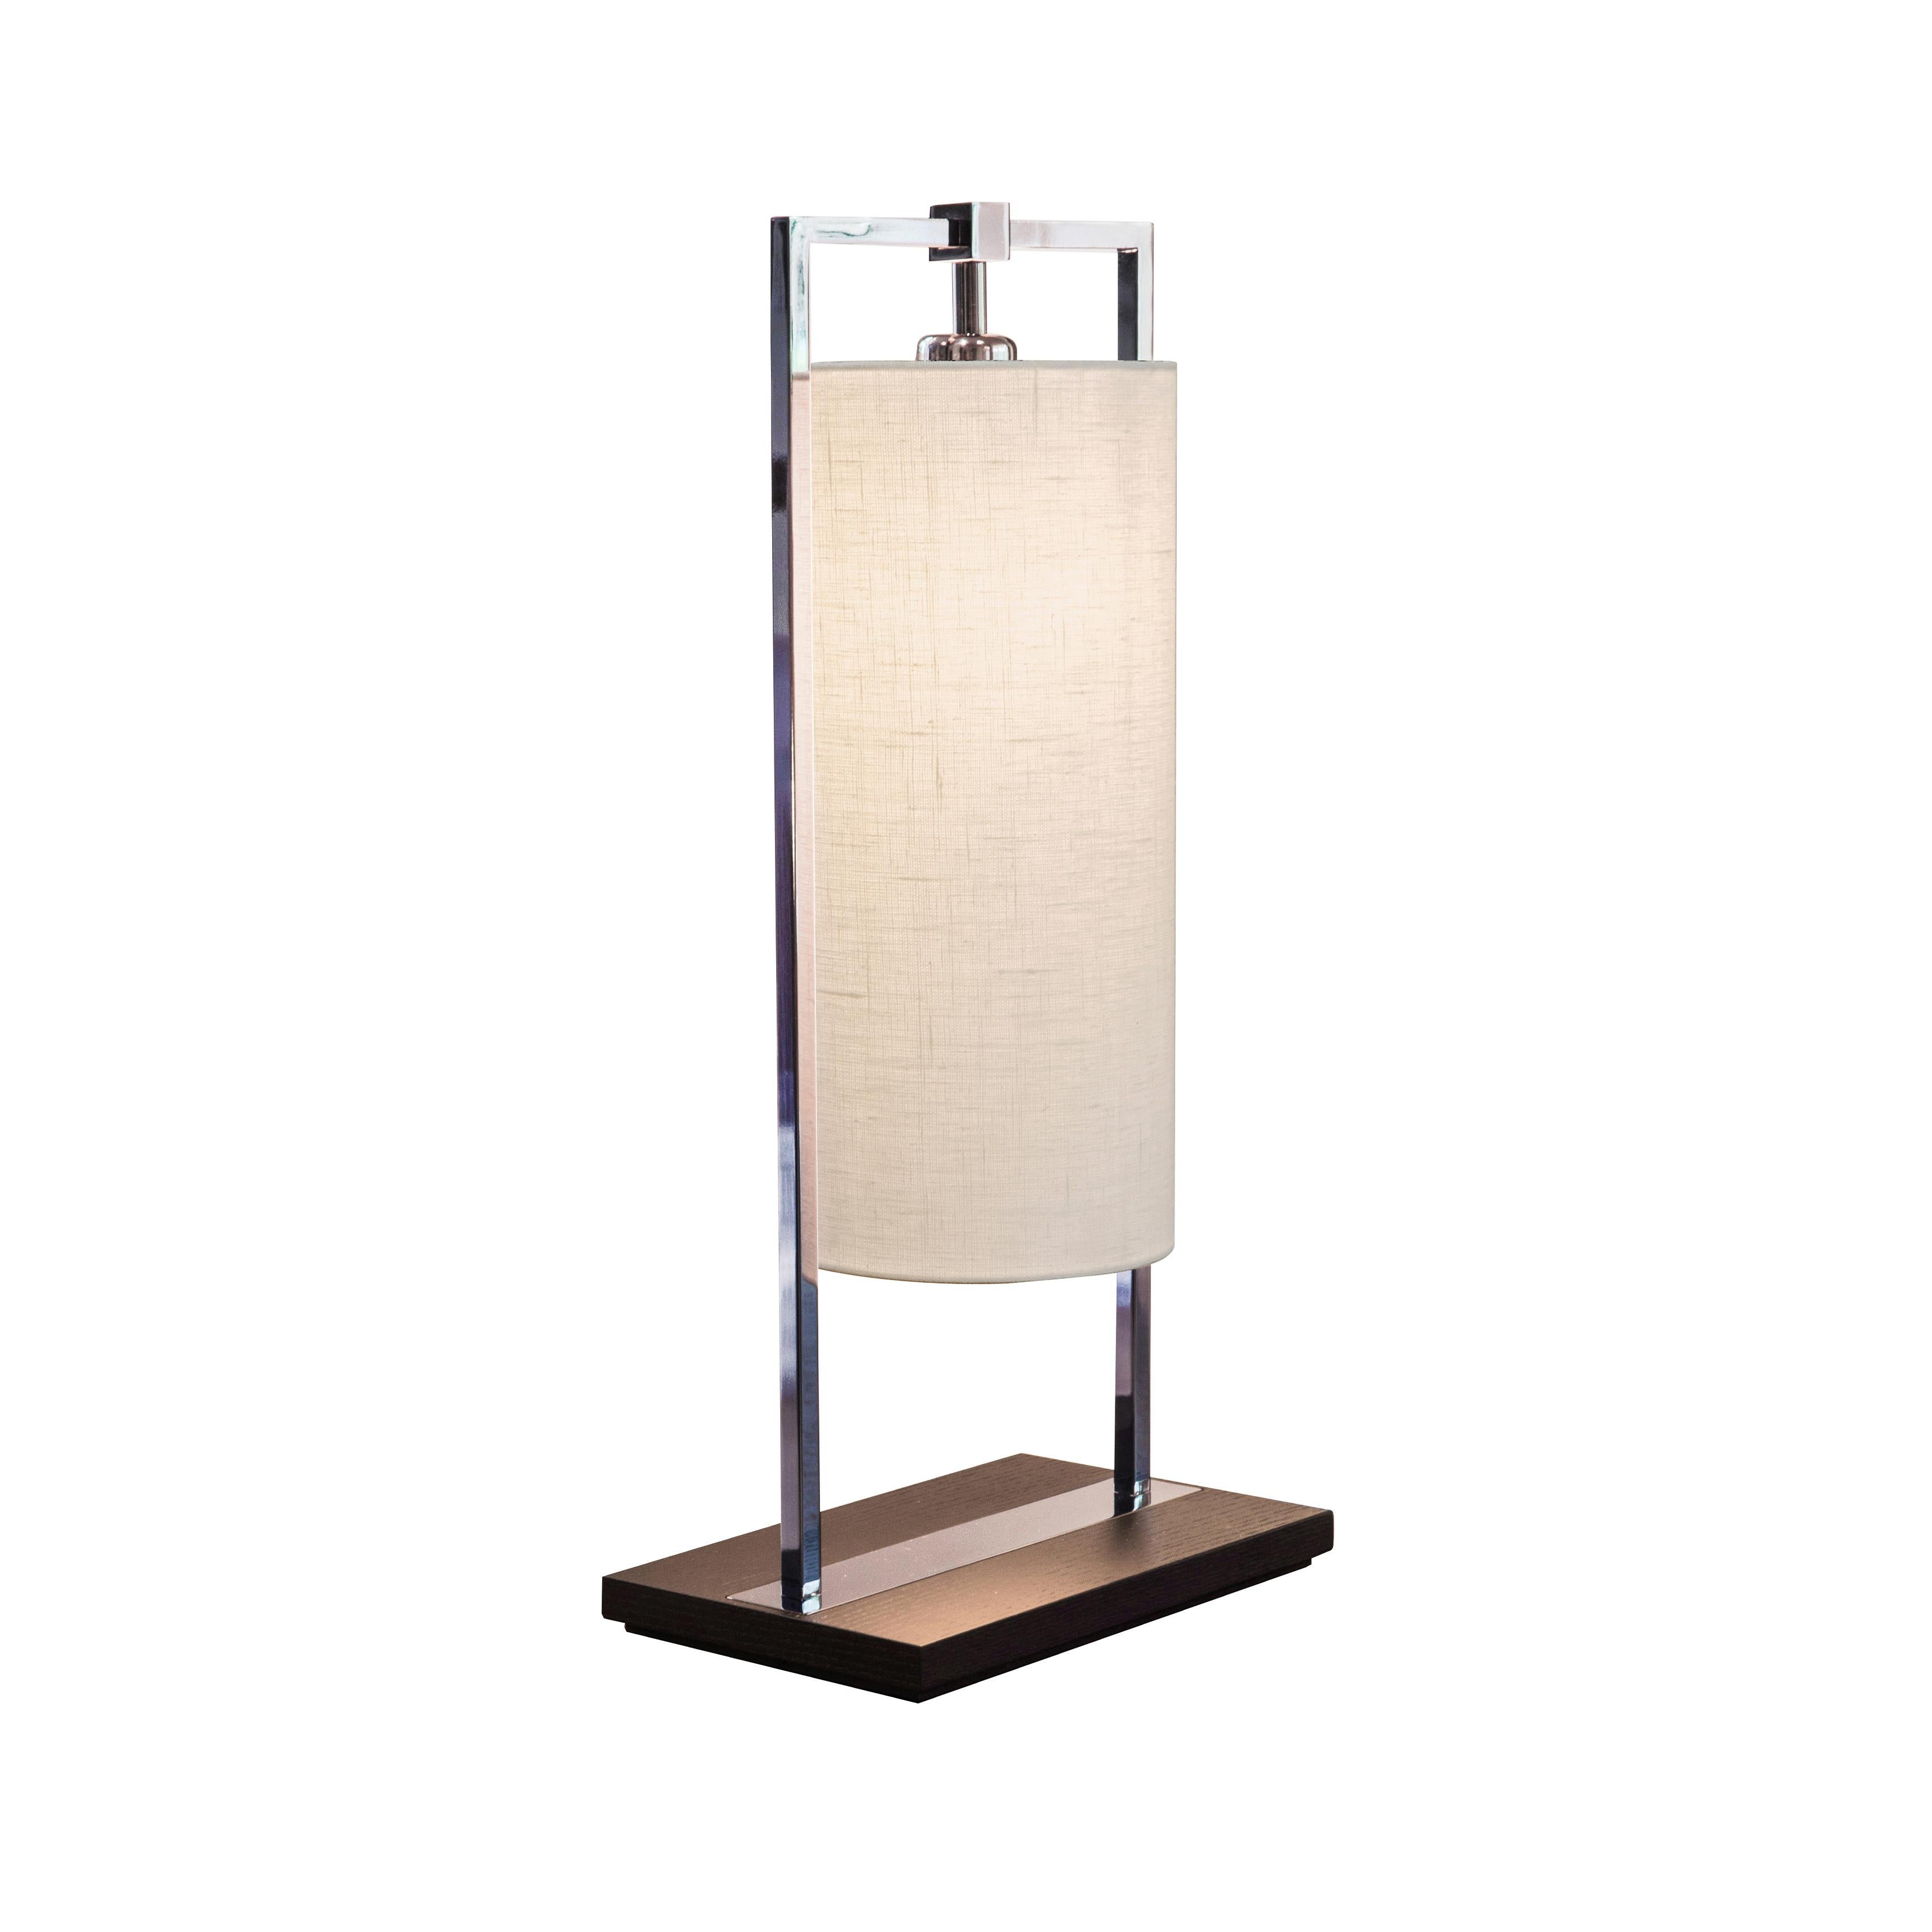 Athena is a table lamp characterised by rectangles (the base) and ovals (the shade) that blend together. The shade can be made with highly tactile fabrics, in linen or percaline, for a couture touch. The base is in dark brown stained oak with black